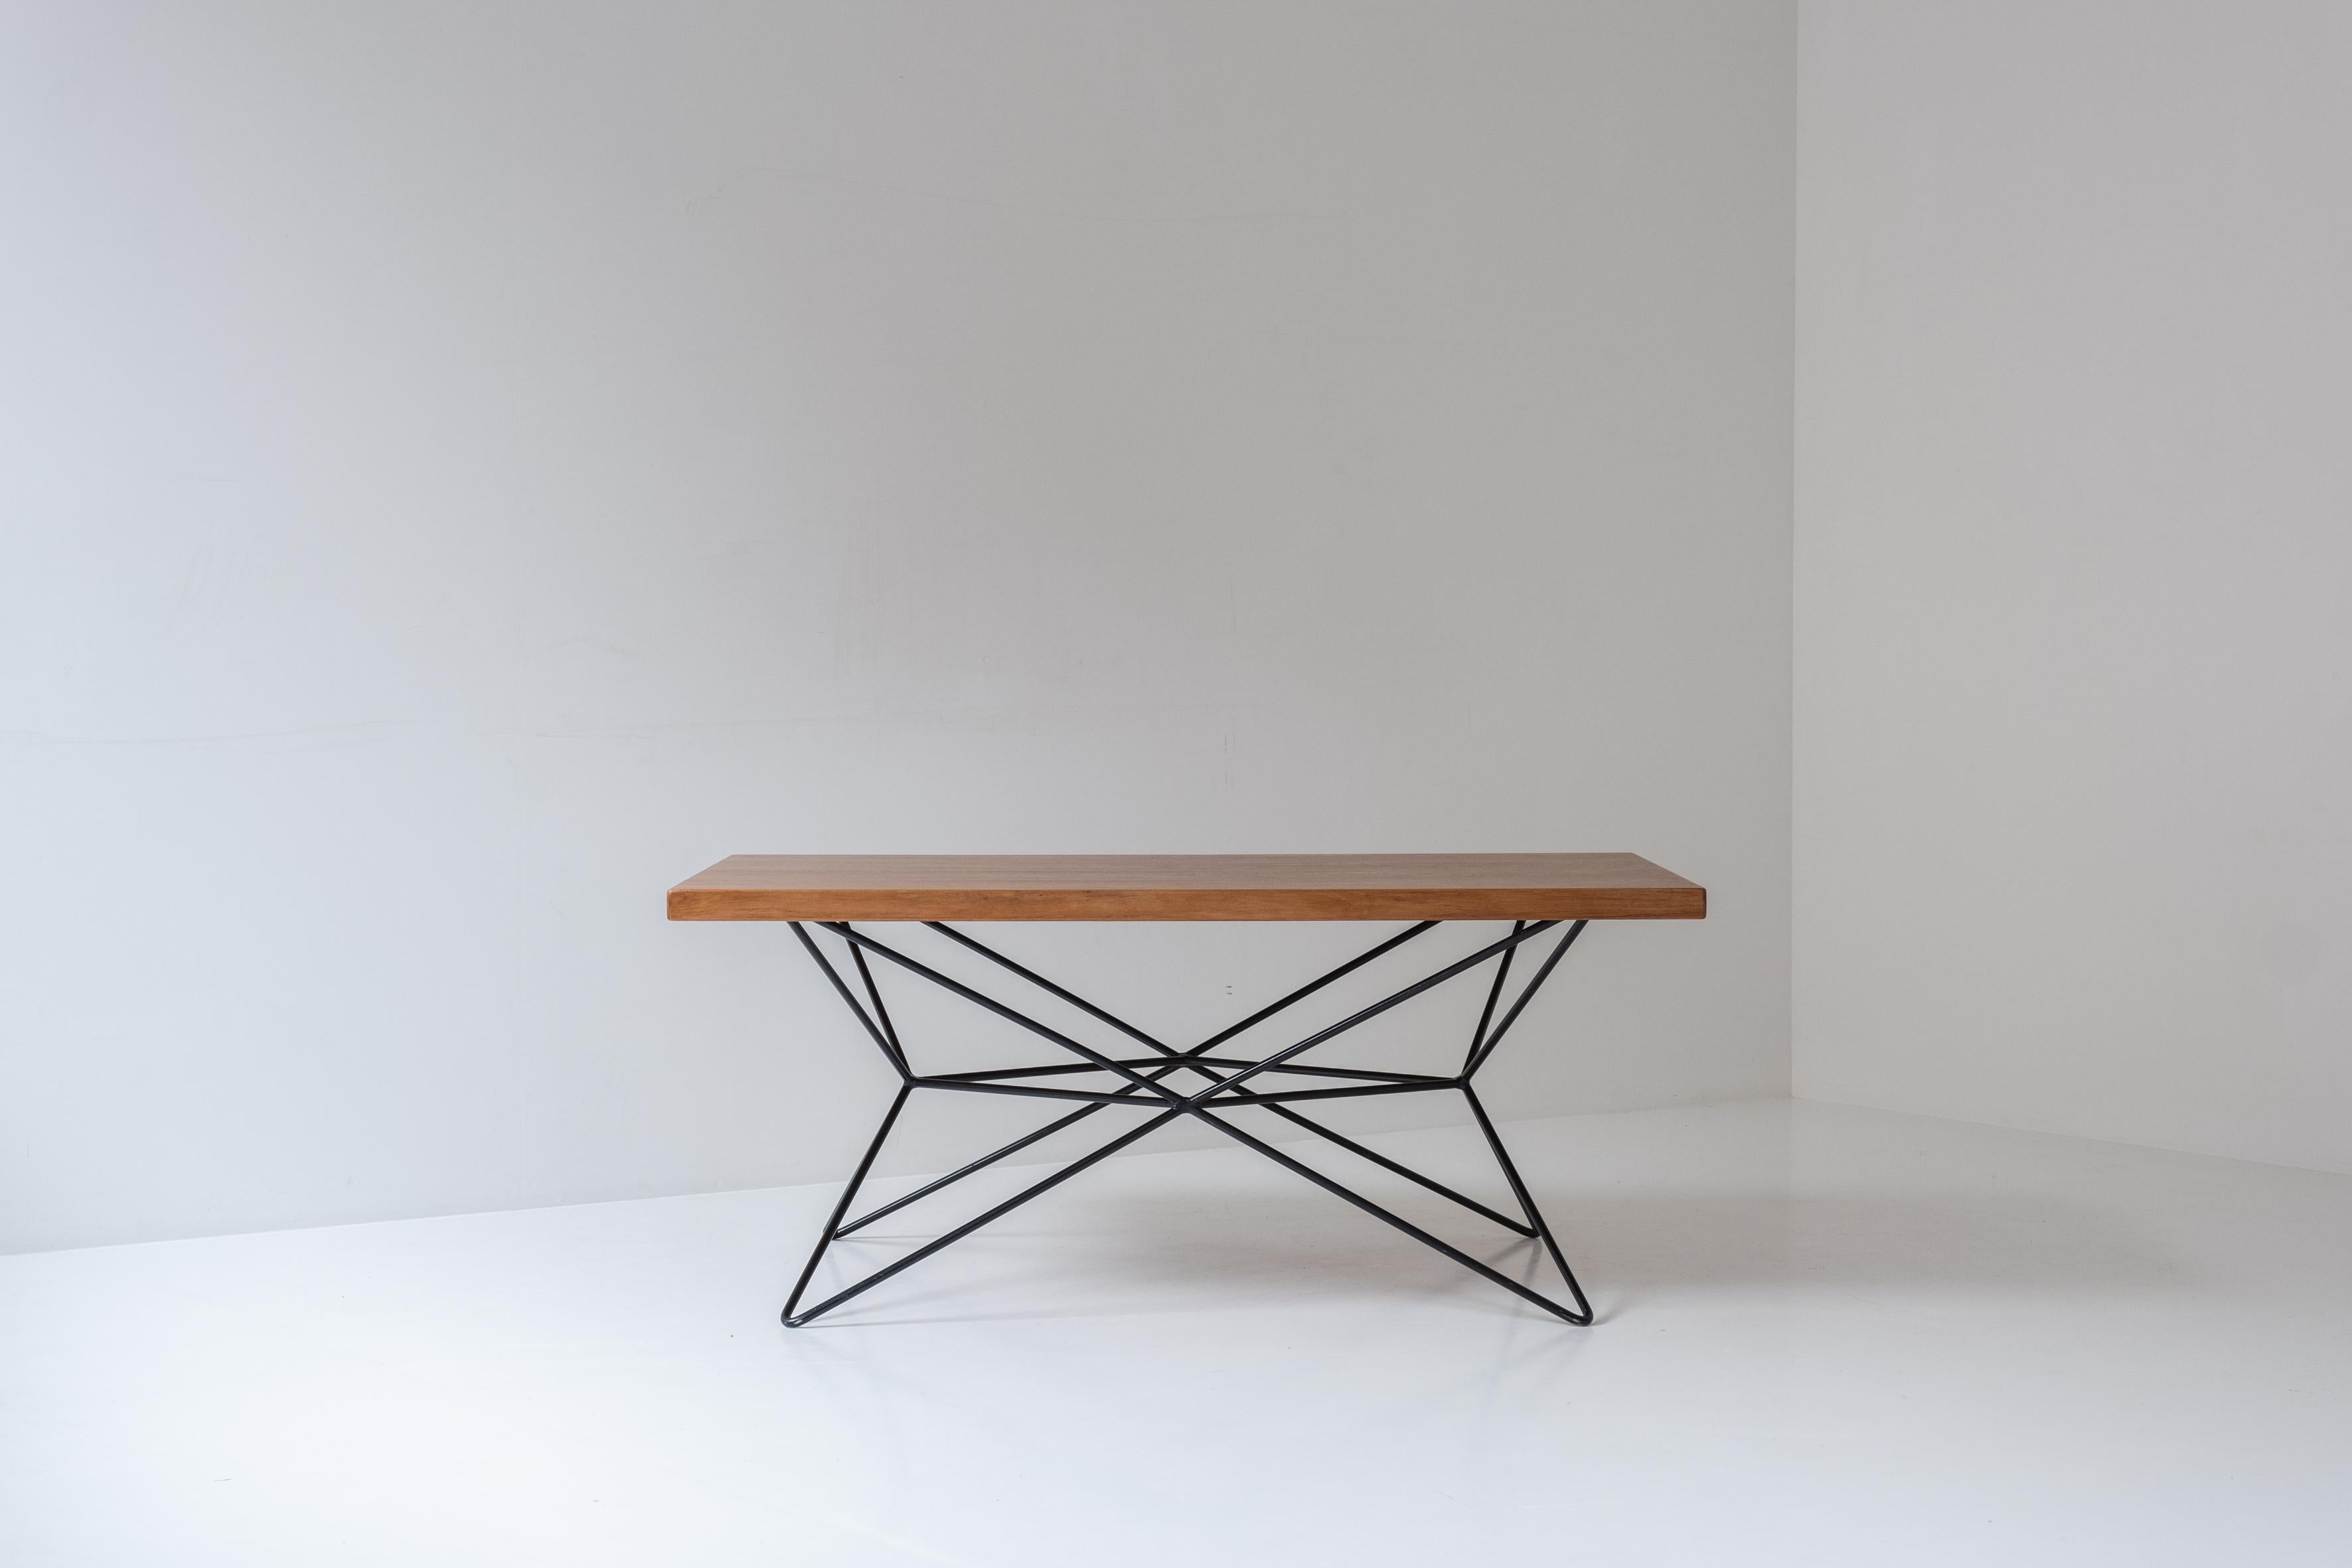 Rare multi table by Bengt Johan Gullberg, designed and manufactured in Sweden during the 1950s. This table features a black lacquered steel frame and teak wooden top. By placing the base in various positions, you can use the table either as a coffee